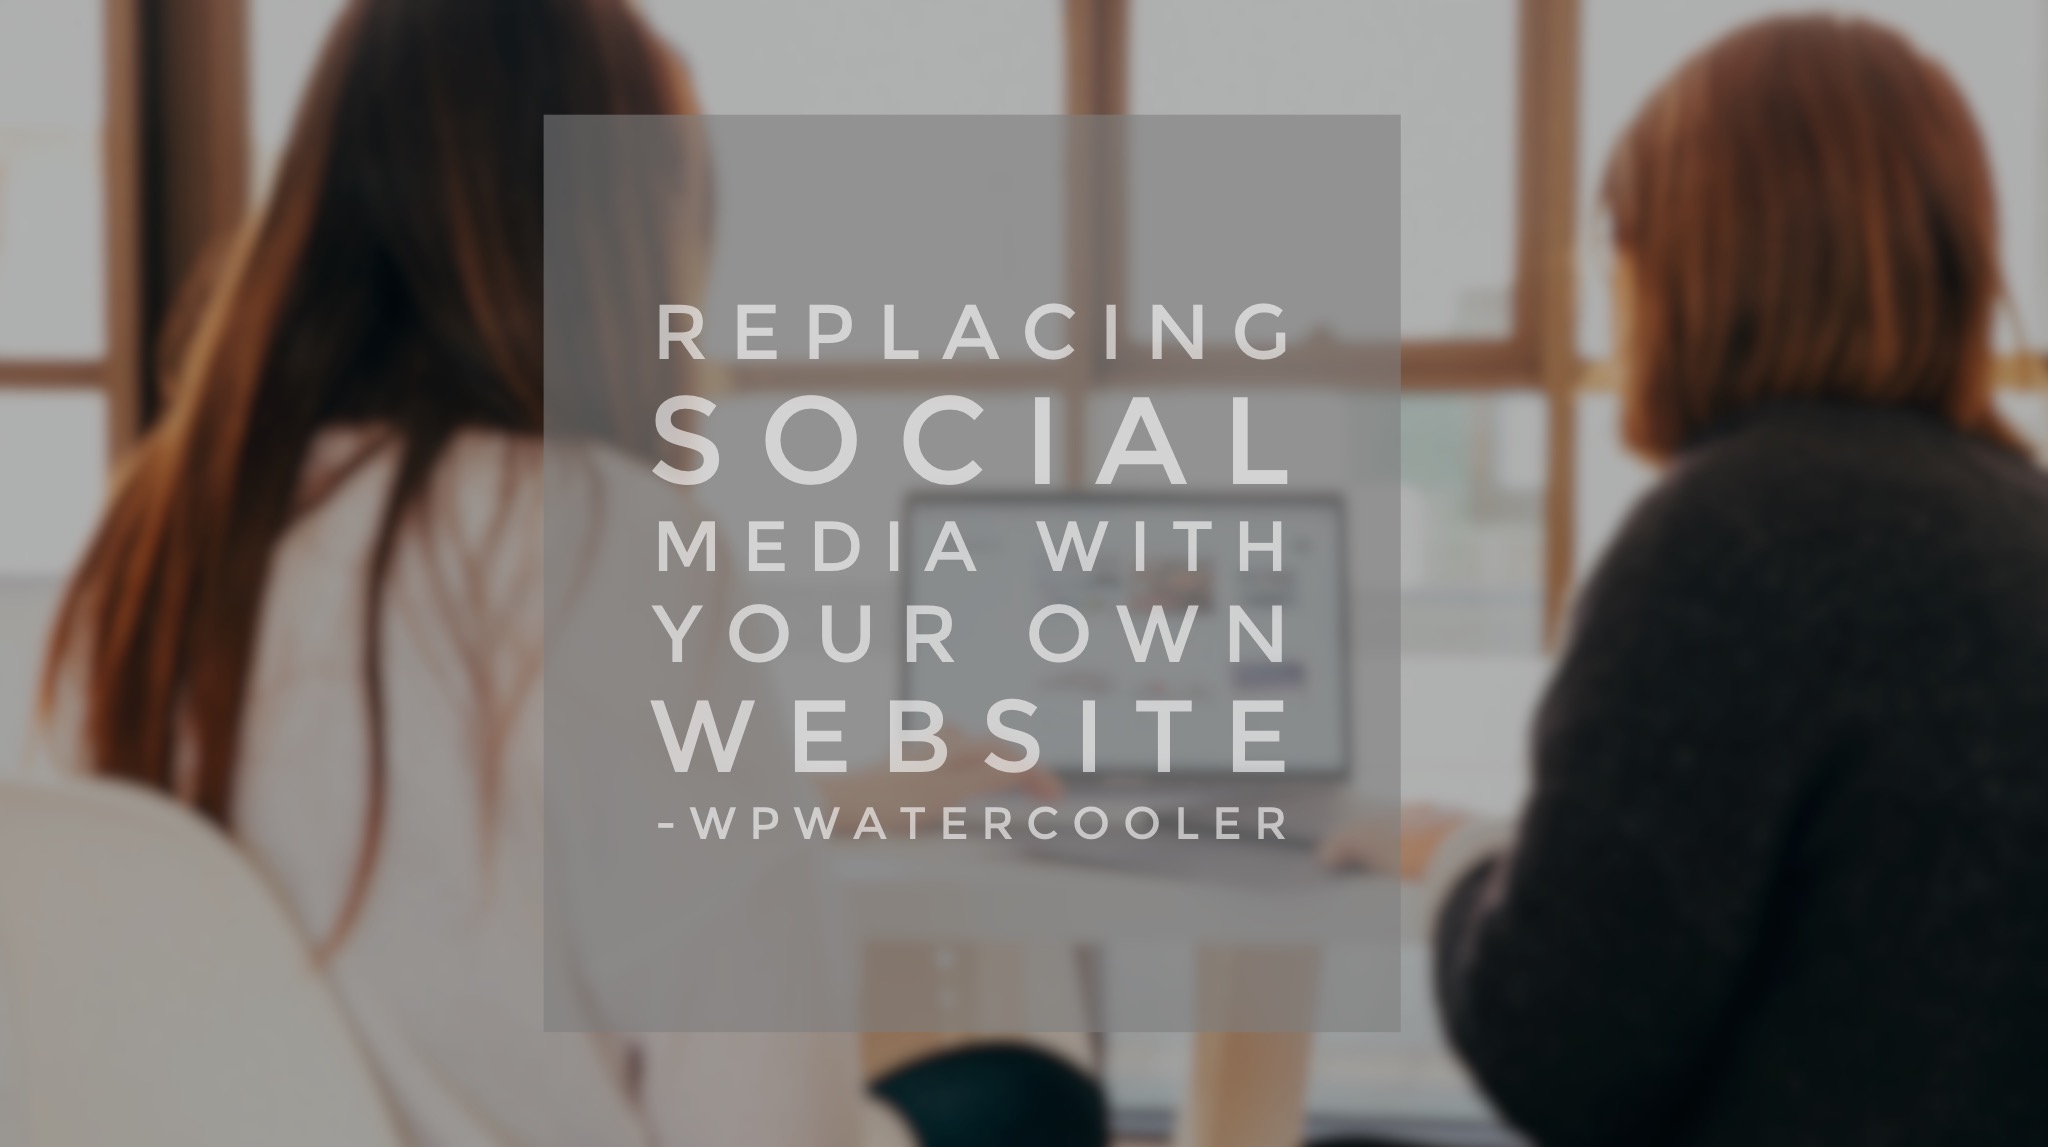 EP302 - Replacing social media with your own website - WPwatercooler